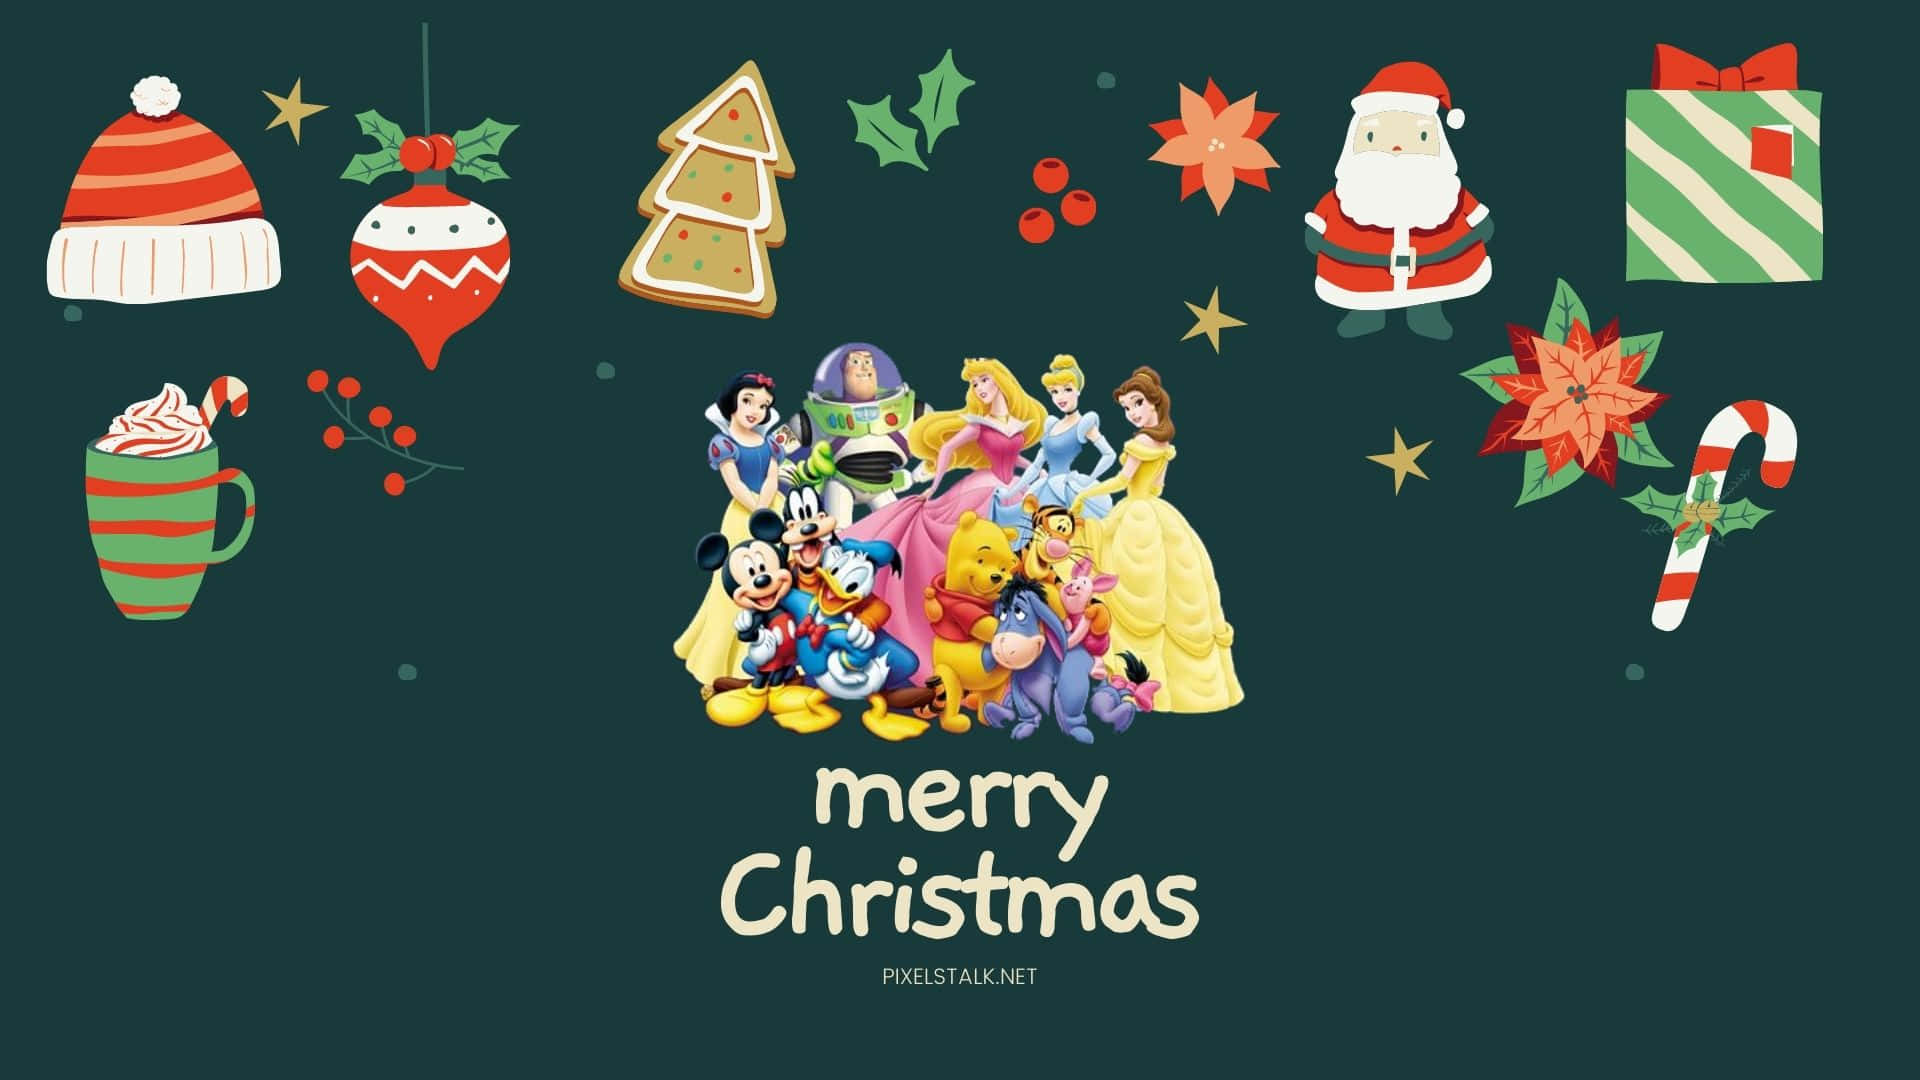 Spread some holiday magic this season with a Disney-themed Christmas iPad Wallpaper